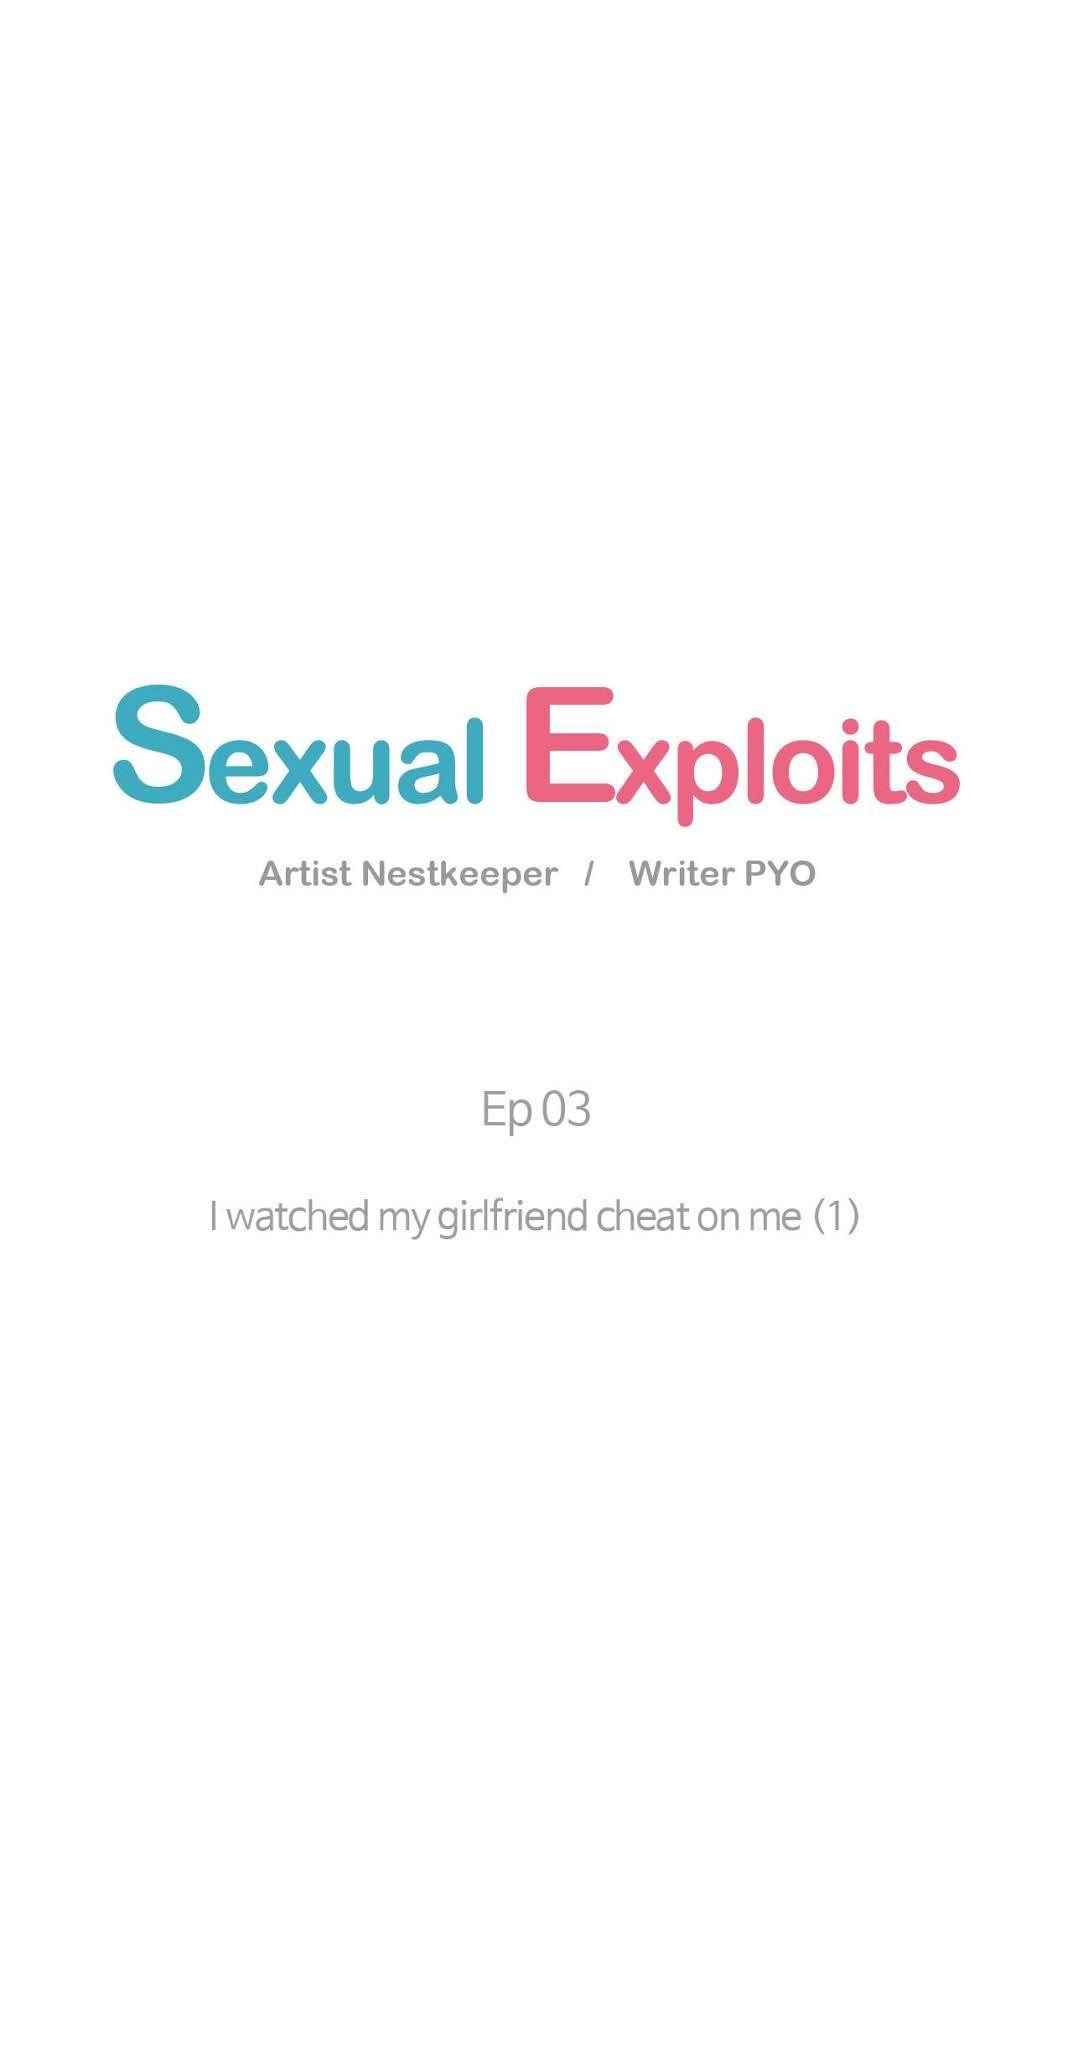 Sexual Exploits - I watched my girlfriend cheat on me 4